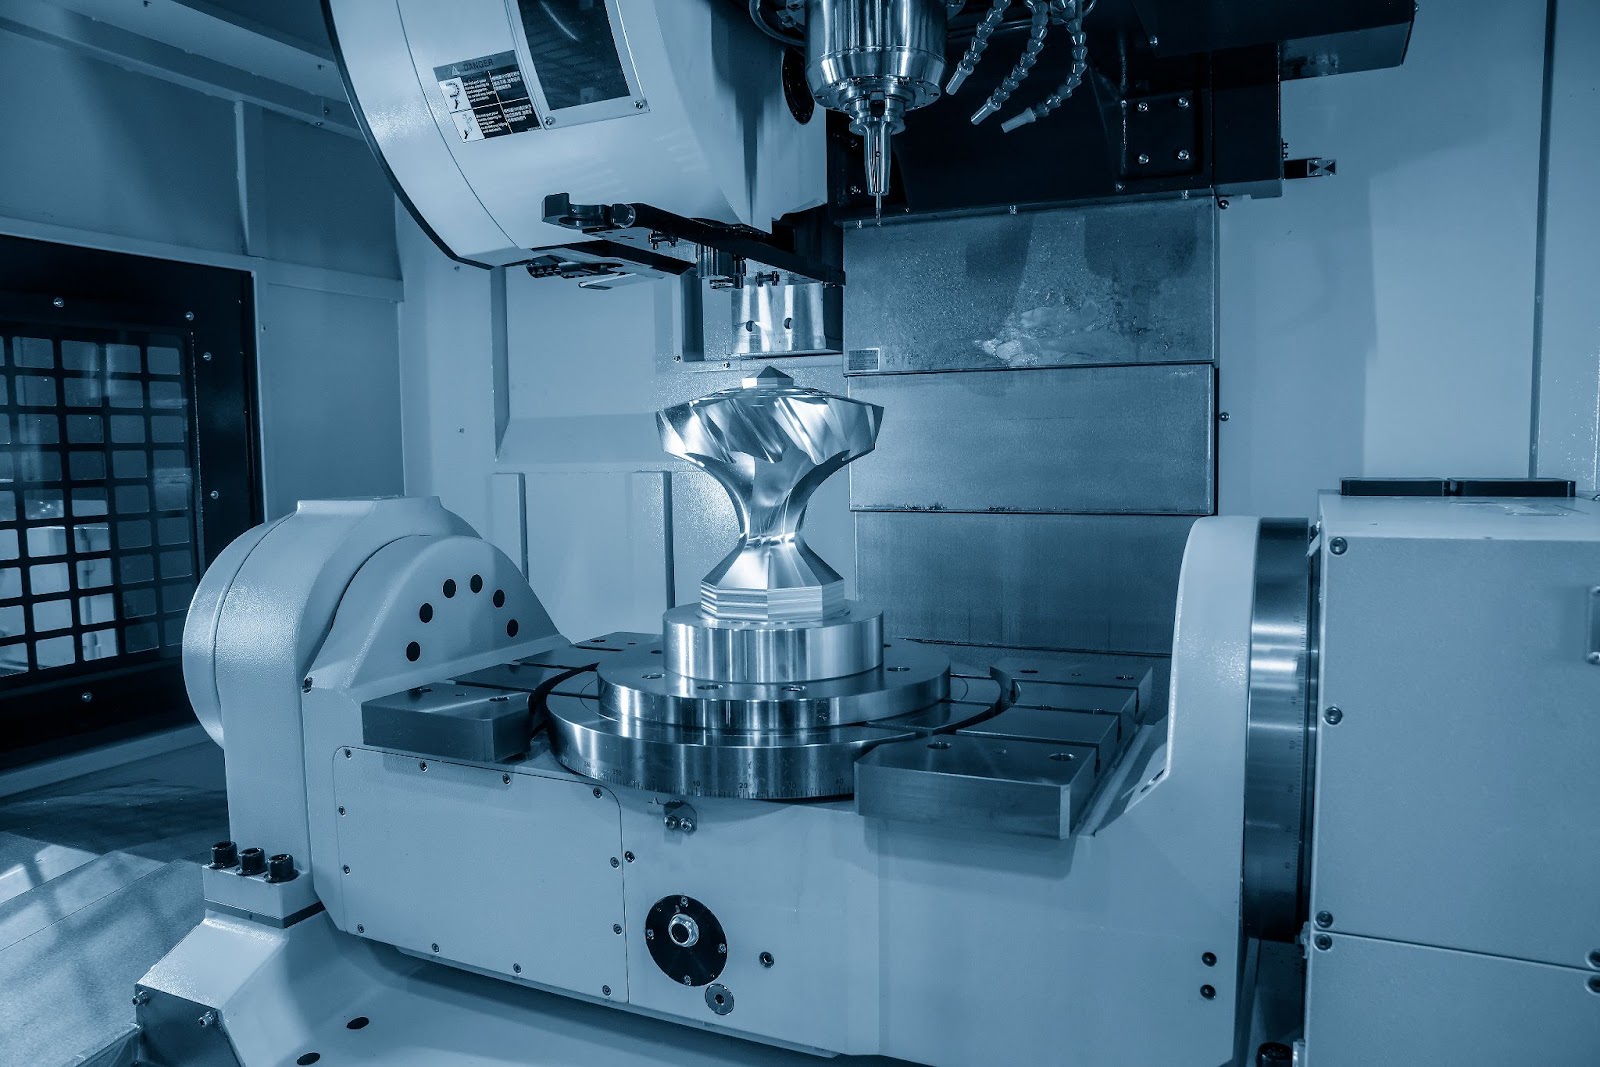 Key components of 5-axis CNC machines